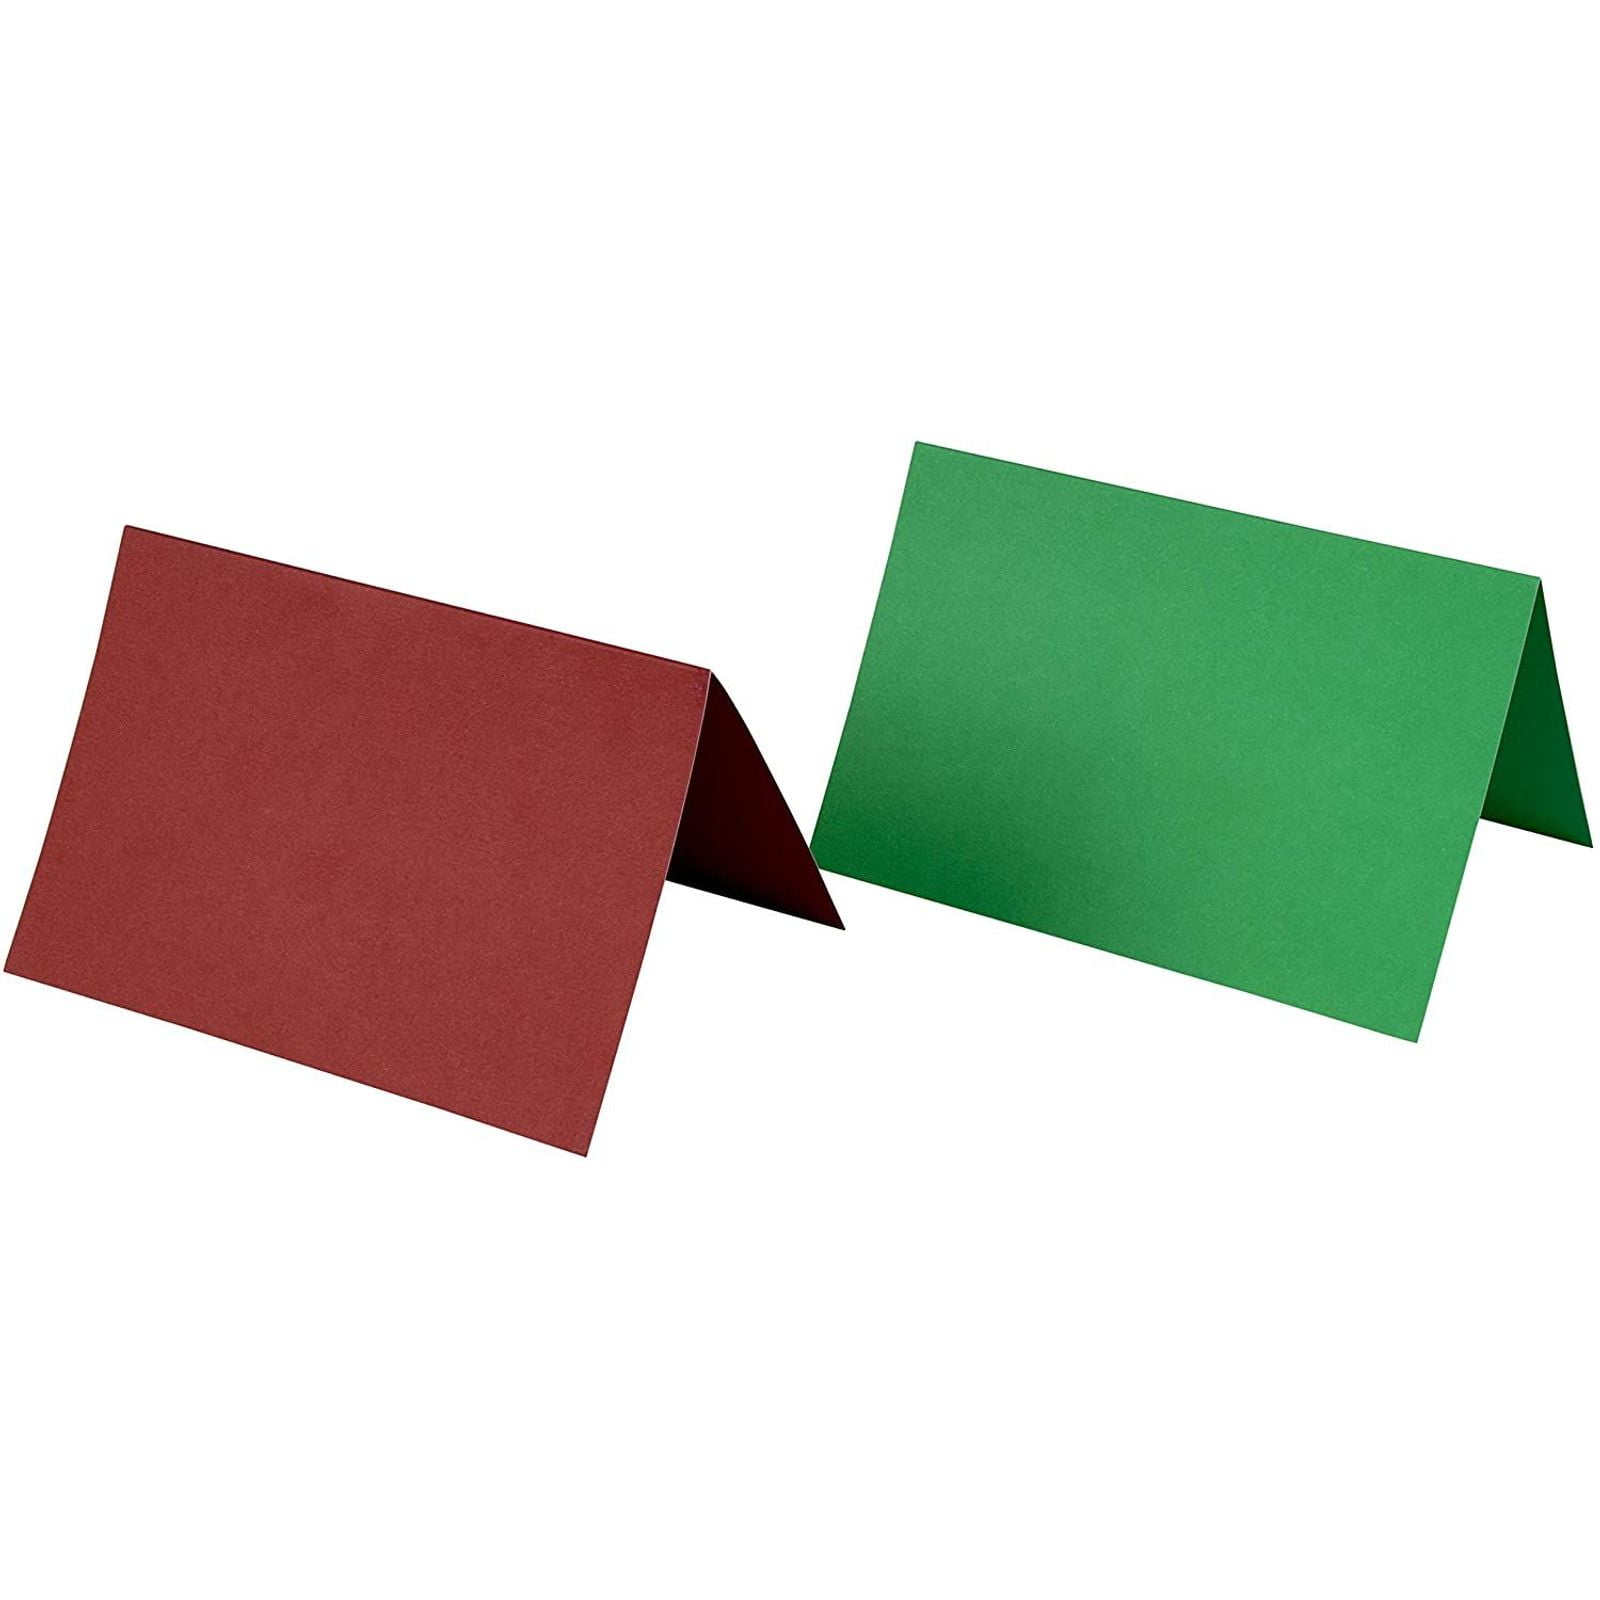 Cards and Envelopes, card size 15x15 cm, envelope size 16x16 cm, green,  red, 50sets - Packlinq